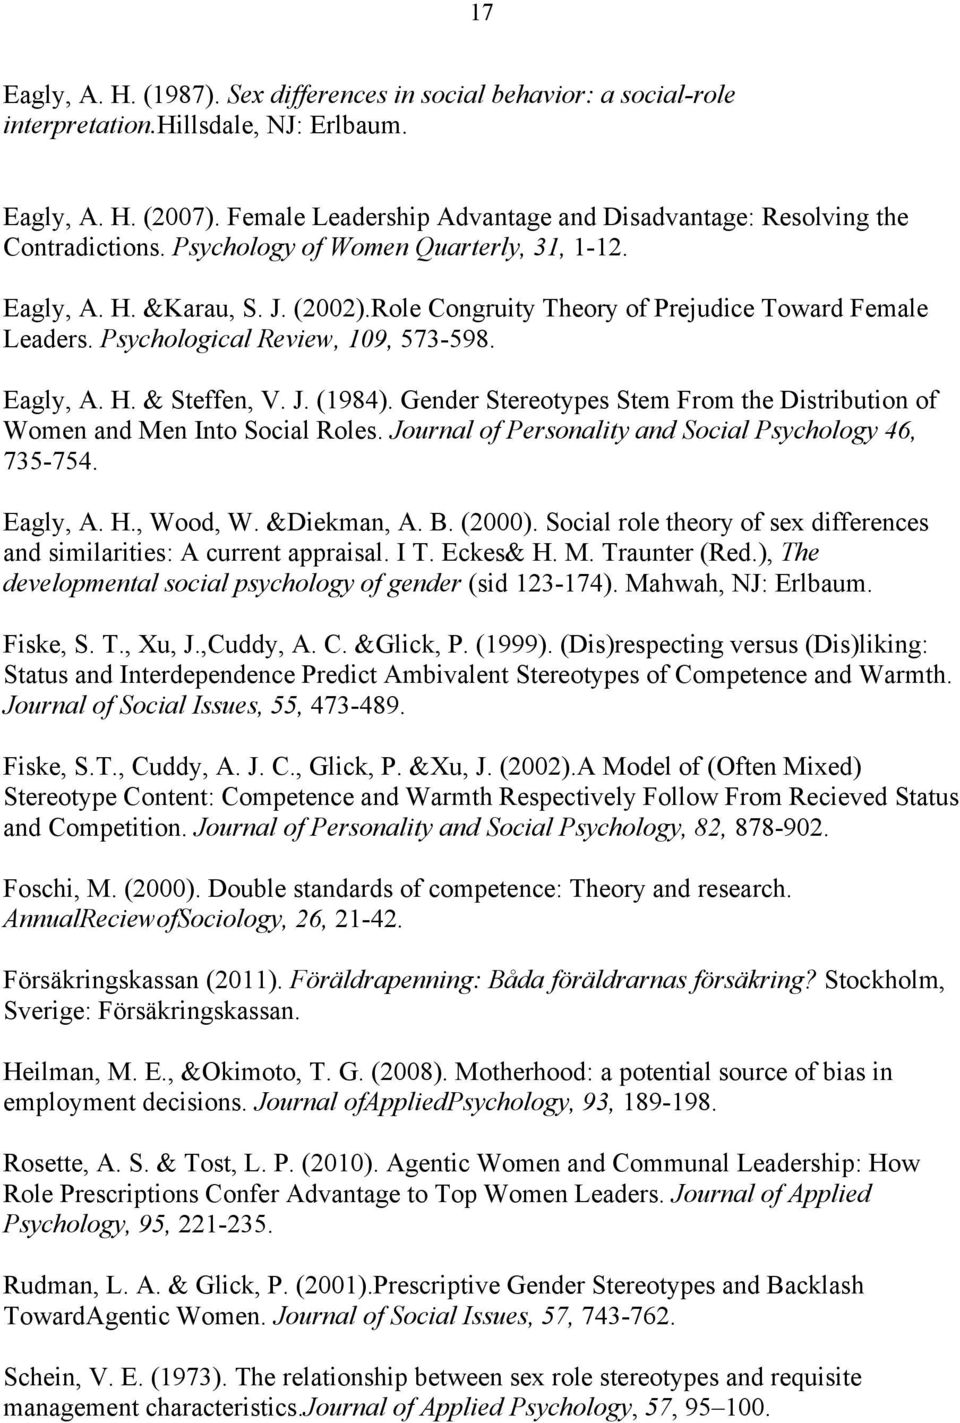 Role Congruity Theory of Prejudice Toward Female Leaders. Psychological Review, 109, 573-598. Eagly, A. H. & Steffen, V. J. (1984).